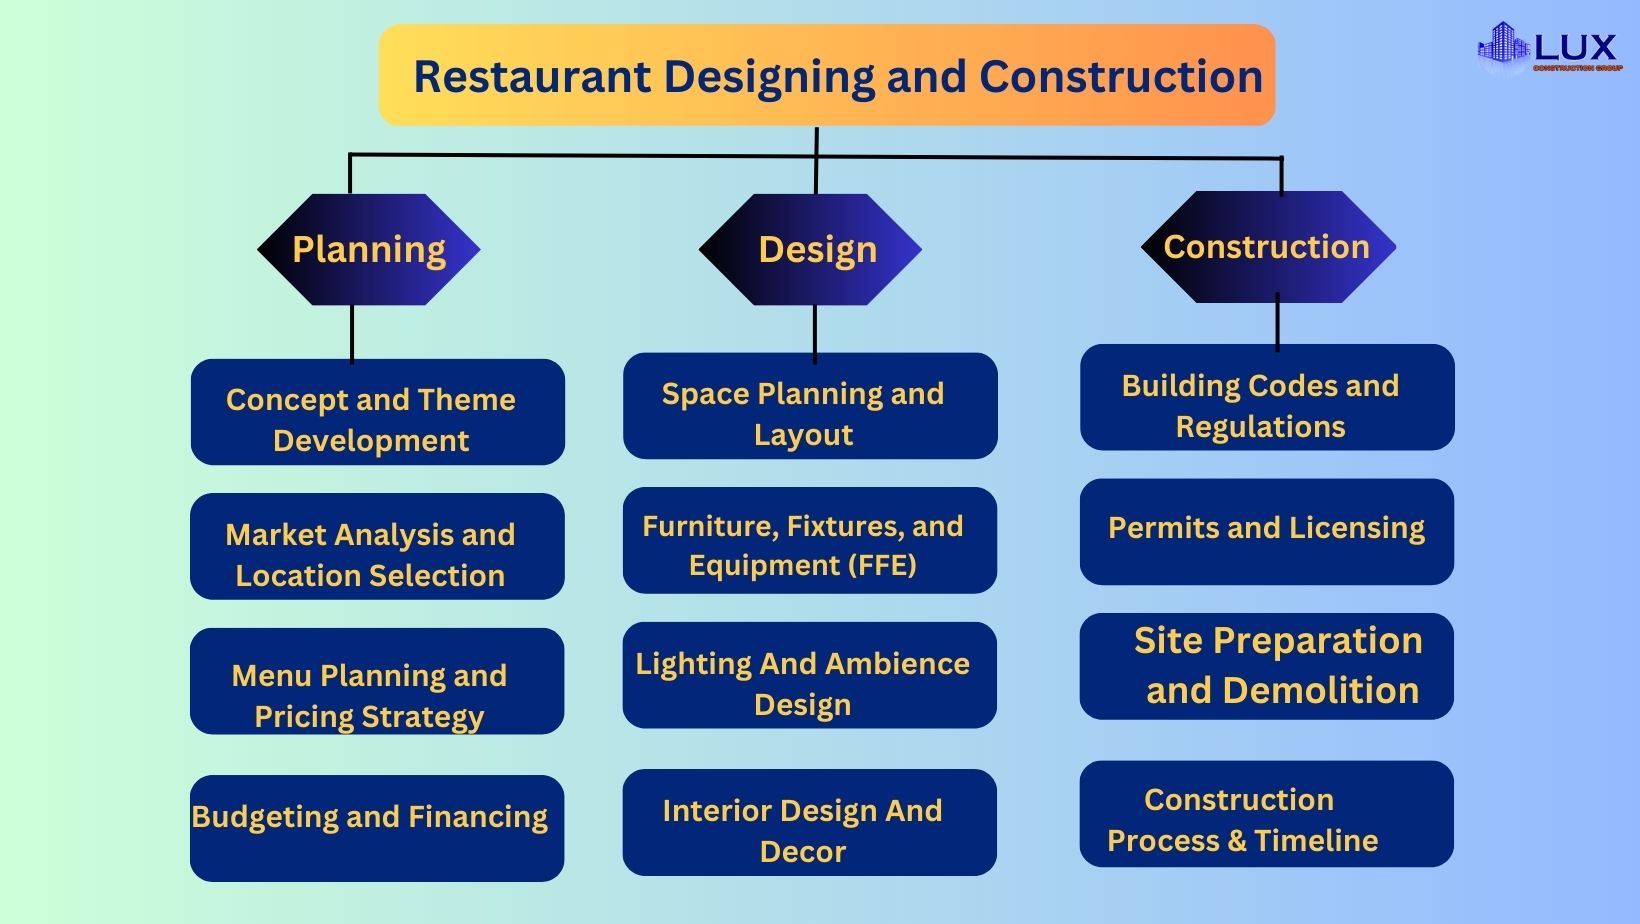 How To Plan, Design, and Construct Restaurant